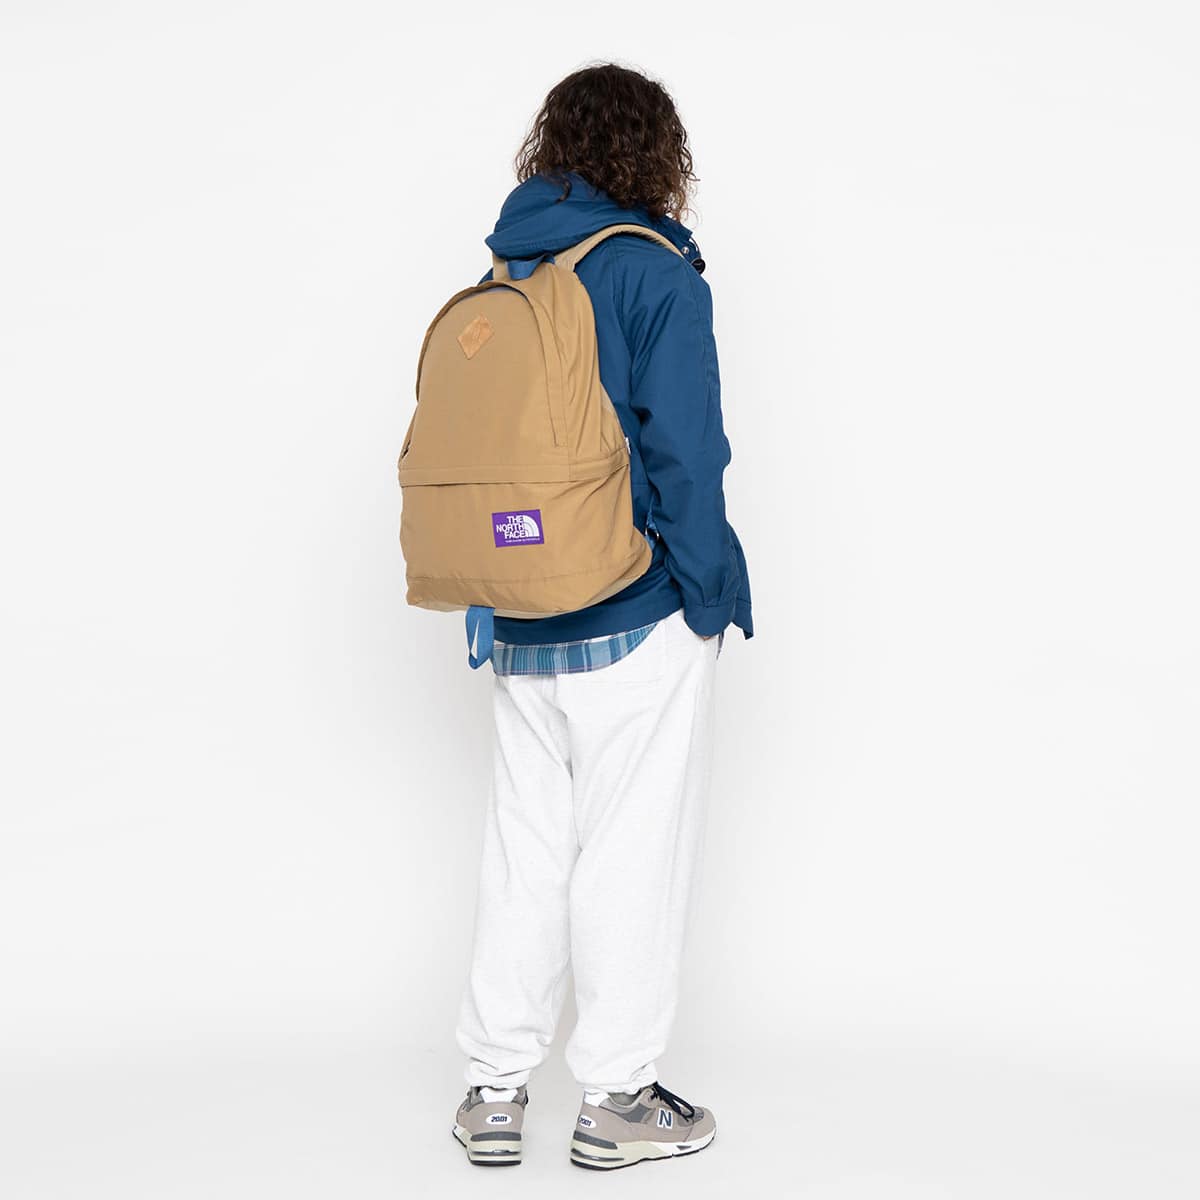 THE NORTH FACE  Field Day Pack1日のみ短時間使用しました